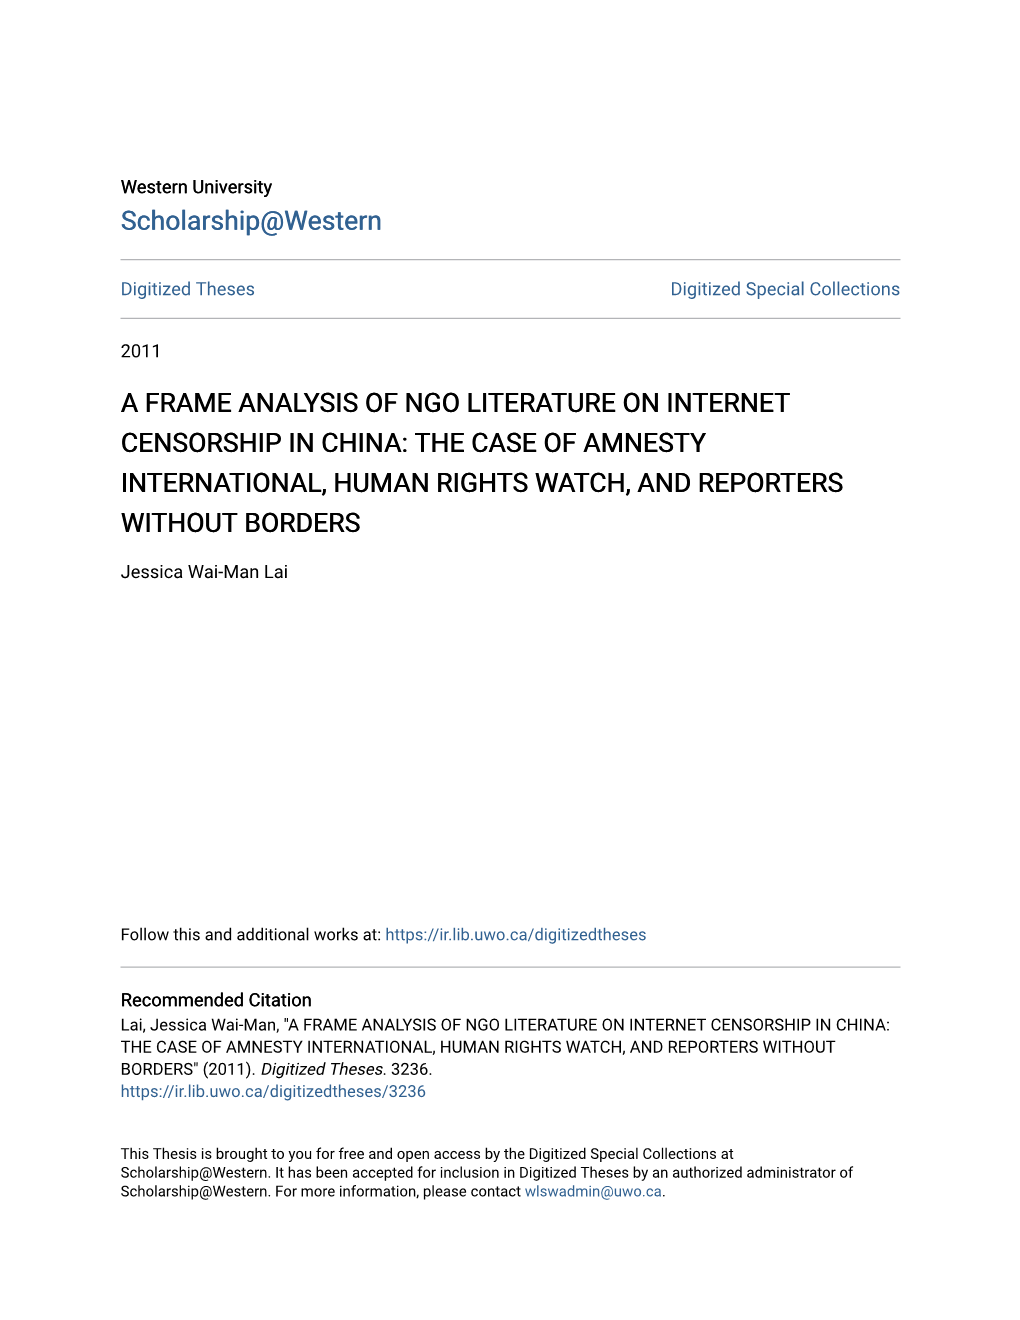 A Frame Analysis of Ngo Literature on Internet Censorship in China: the Case of Amnesty International, Human Rights Watch, and Reporters Without Borders